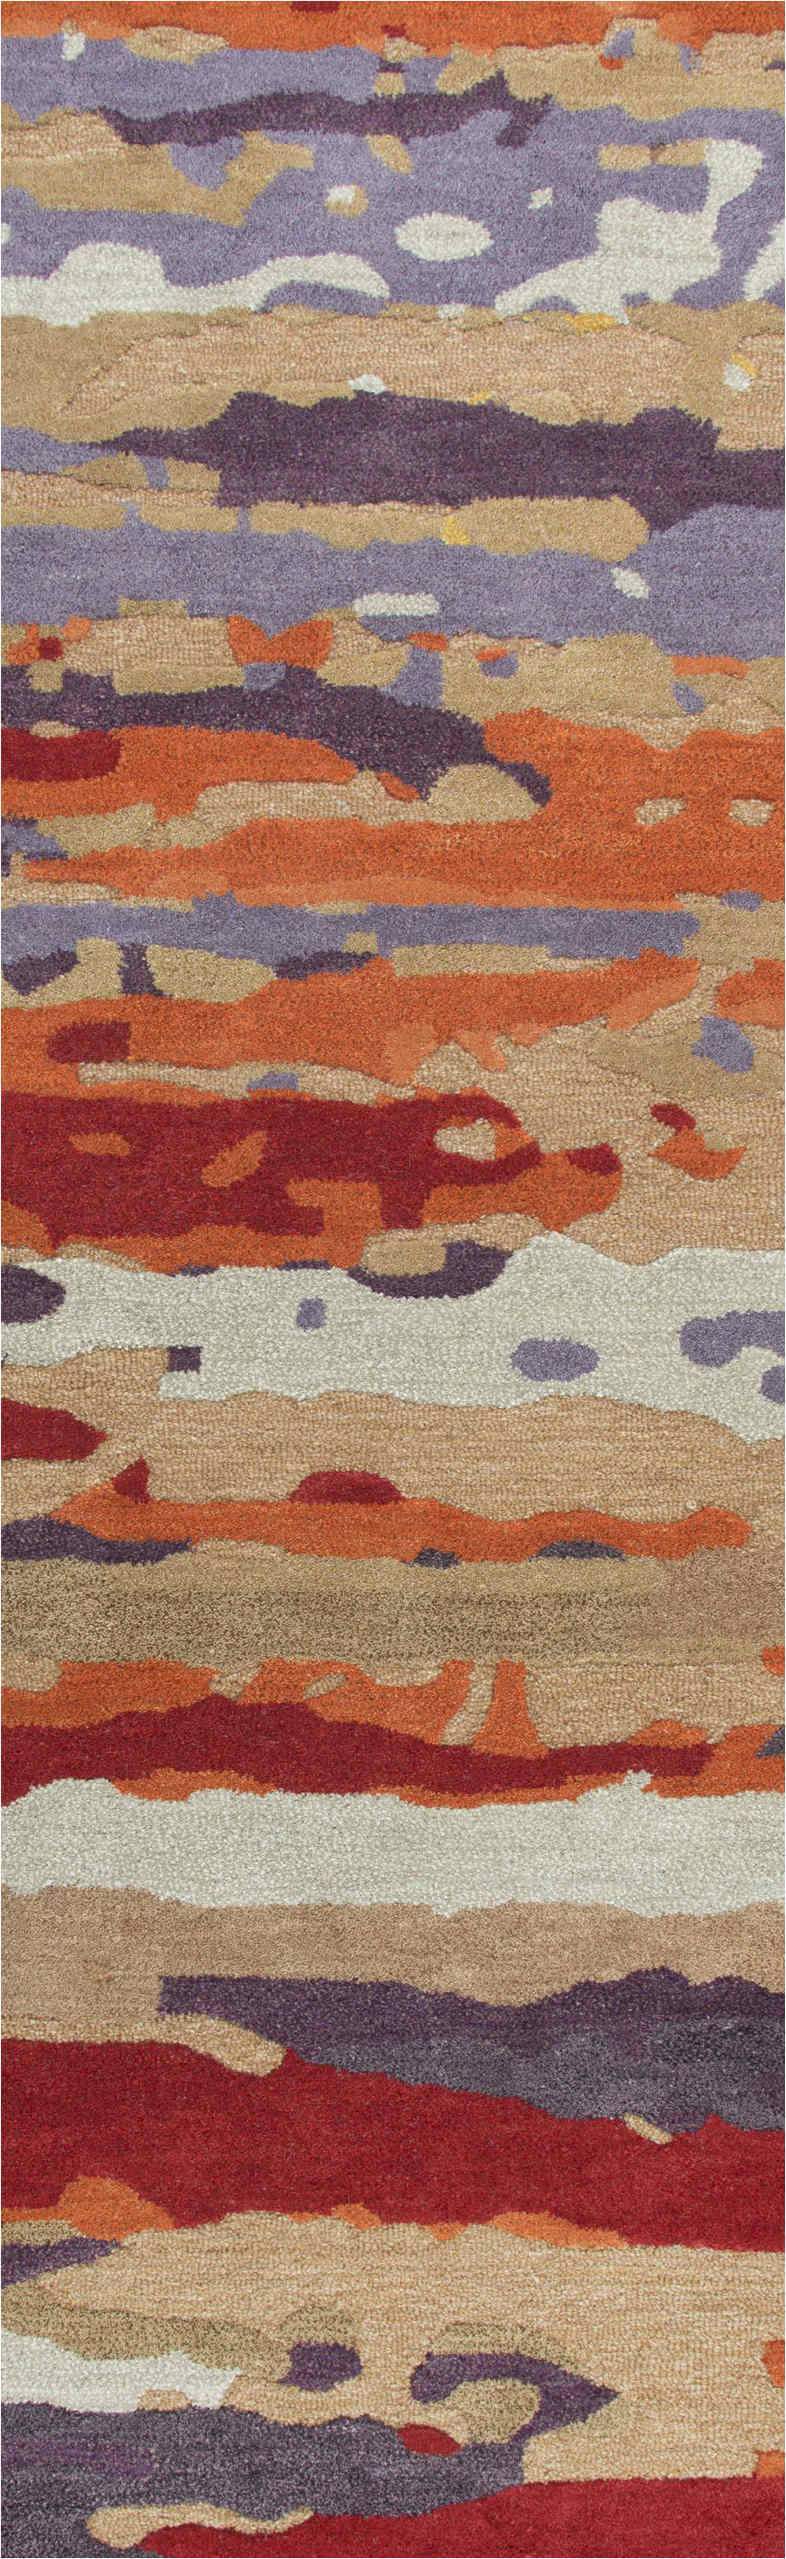 Rizzy Home Area Rugs Connie Post Area Rugs CNP110 Multi Modern 100% Wool With Unique Shapes